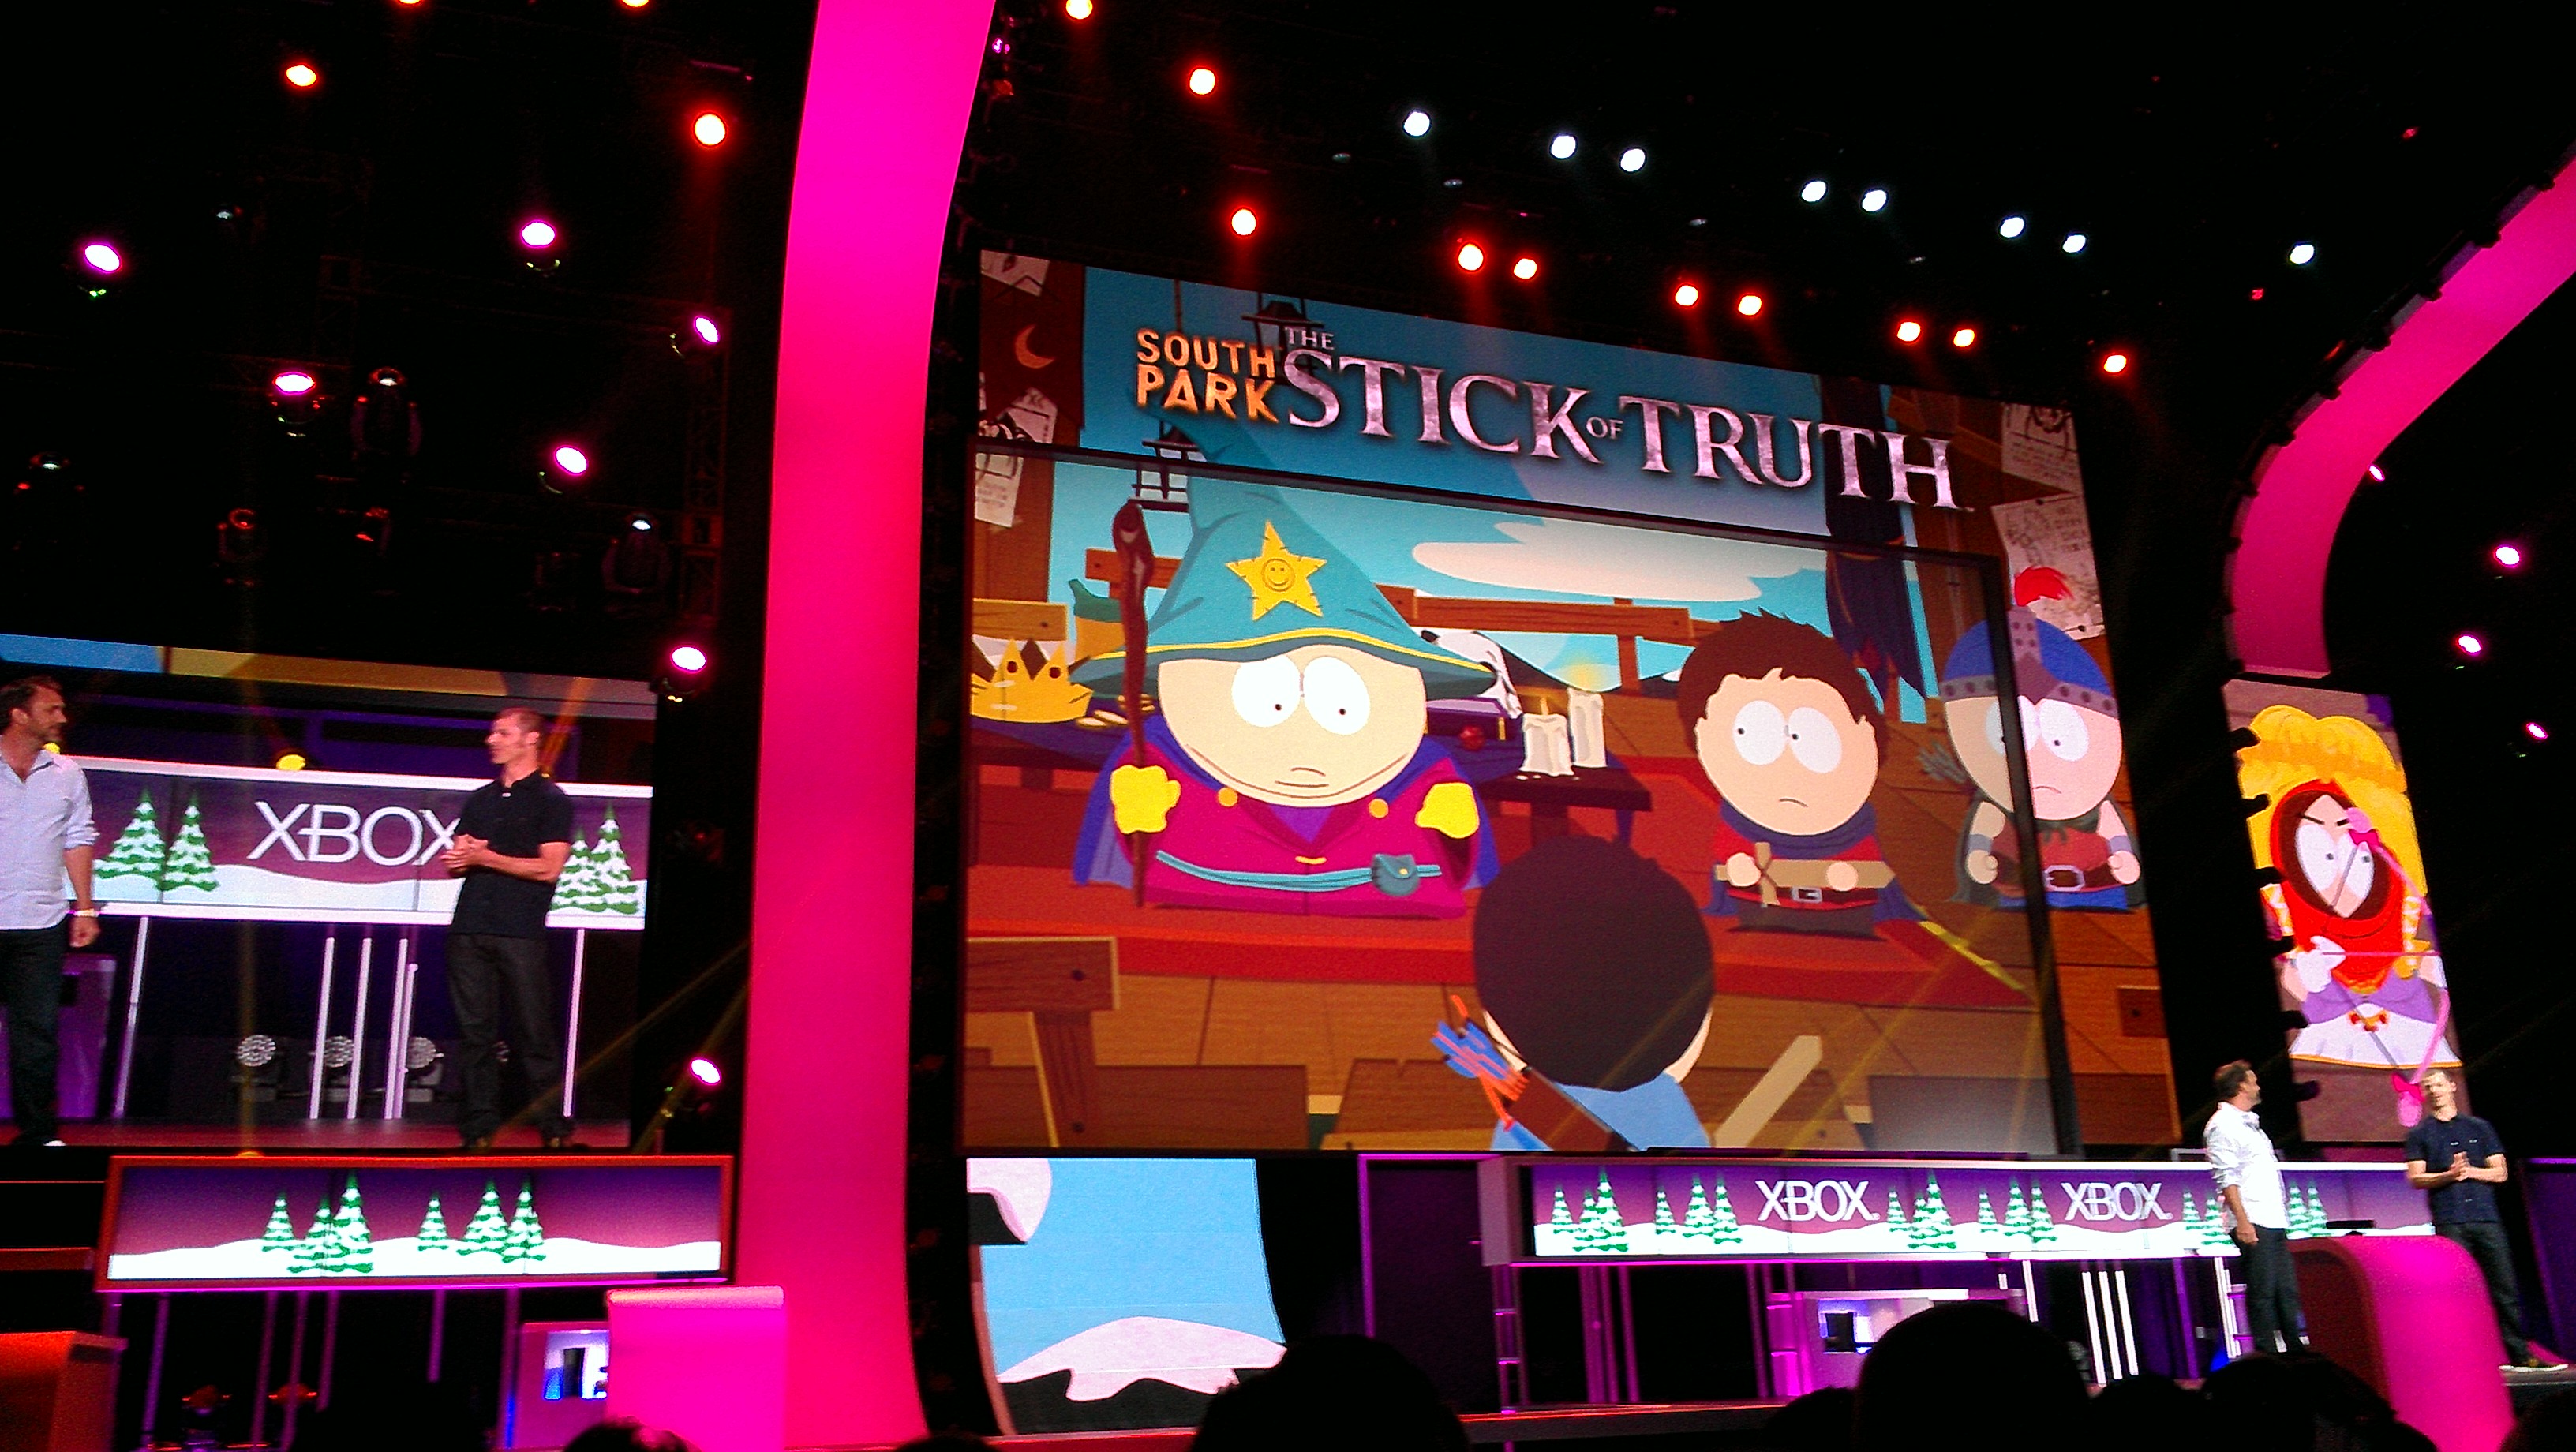 South Park Gets a Video Game by the Show Creators and THQ